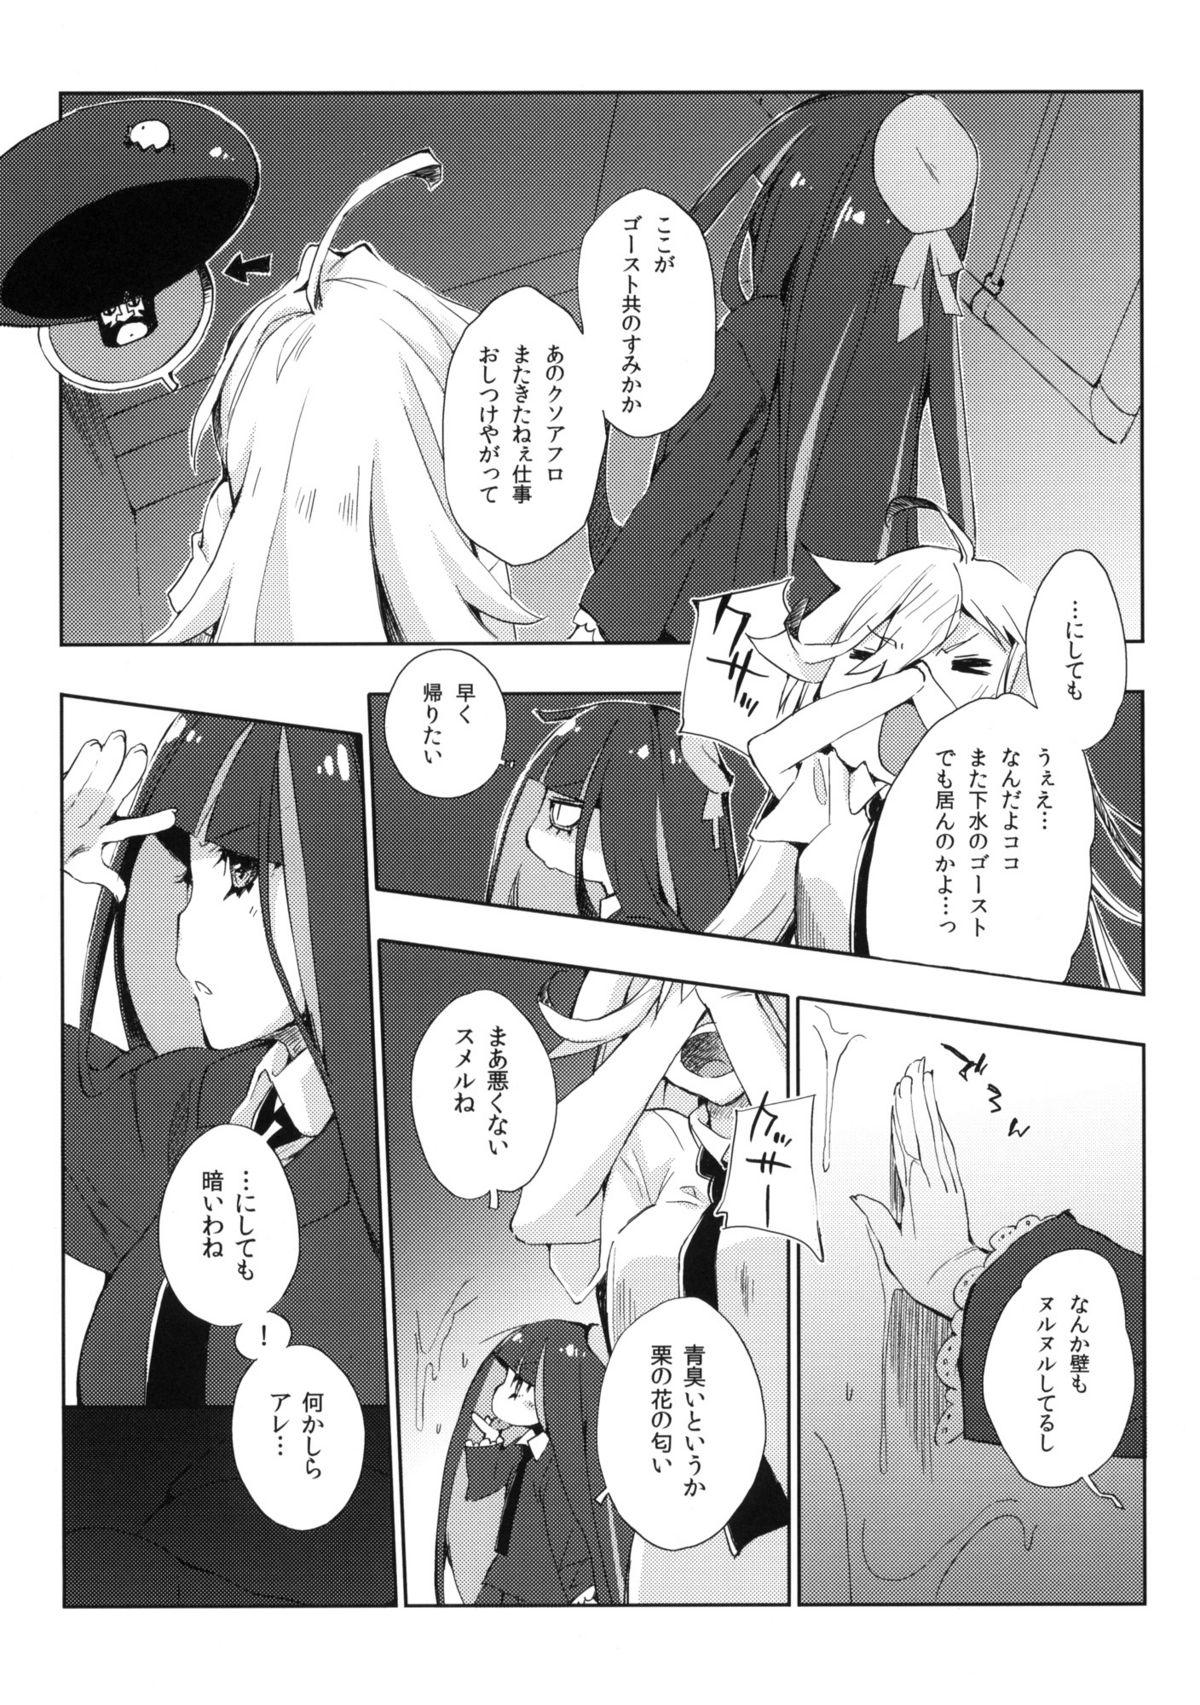 Cosplay ¿inmoral unmoral? - Panty and stocking with garterbelt Blow Jobs - Page 4